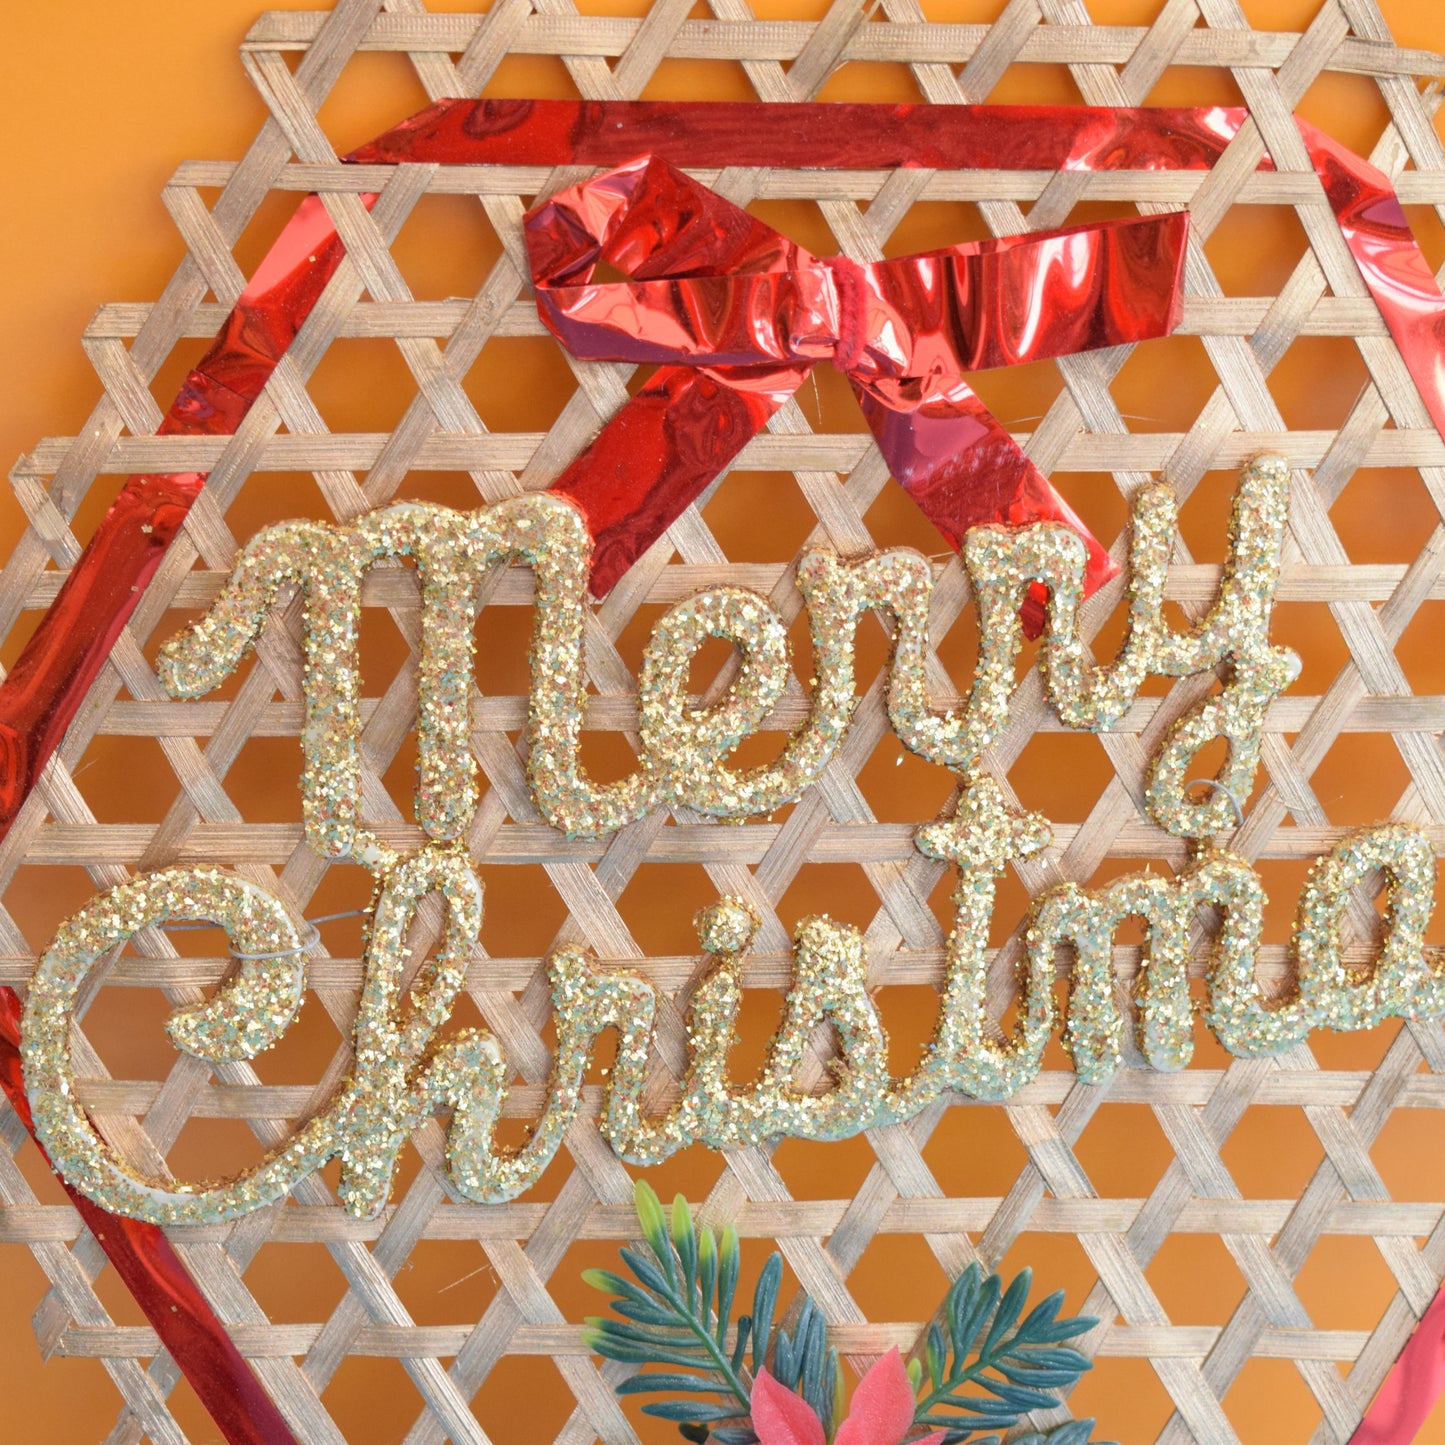 Vintage 1970s Glitter Merry Christmas Signs